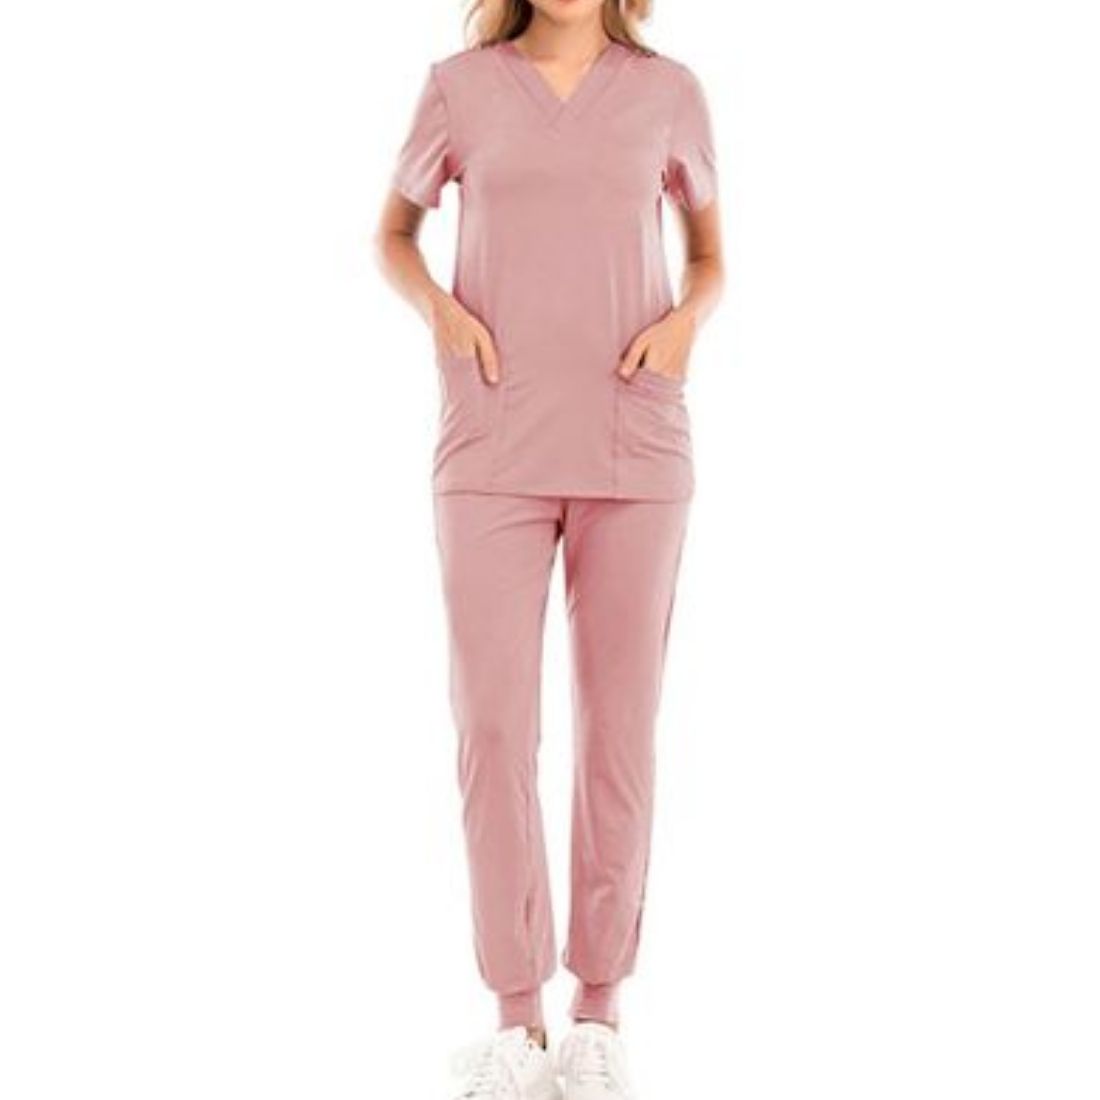 Buy Docotr scrubs for best price which is Made of cotton, soft, durable and machine washable making it comfortable and easy care .